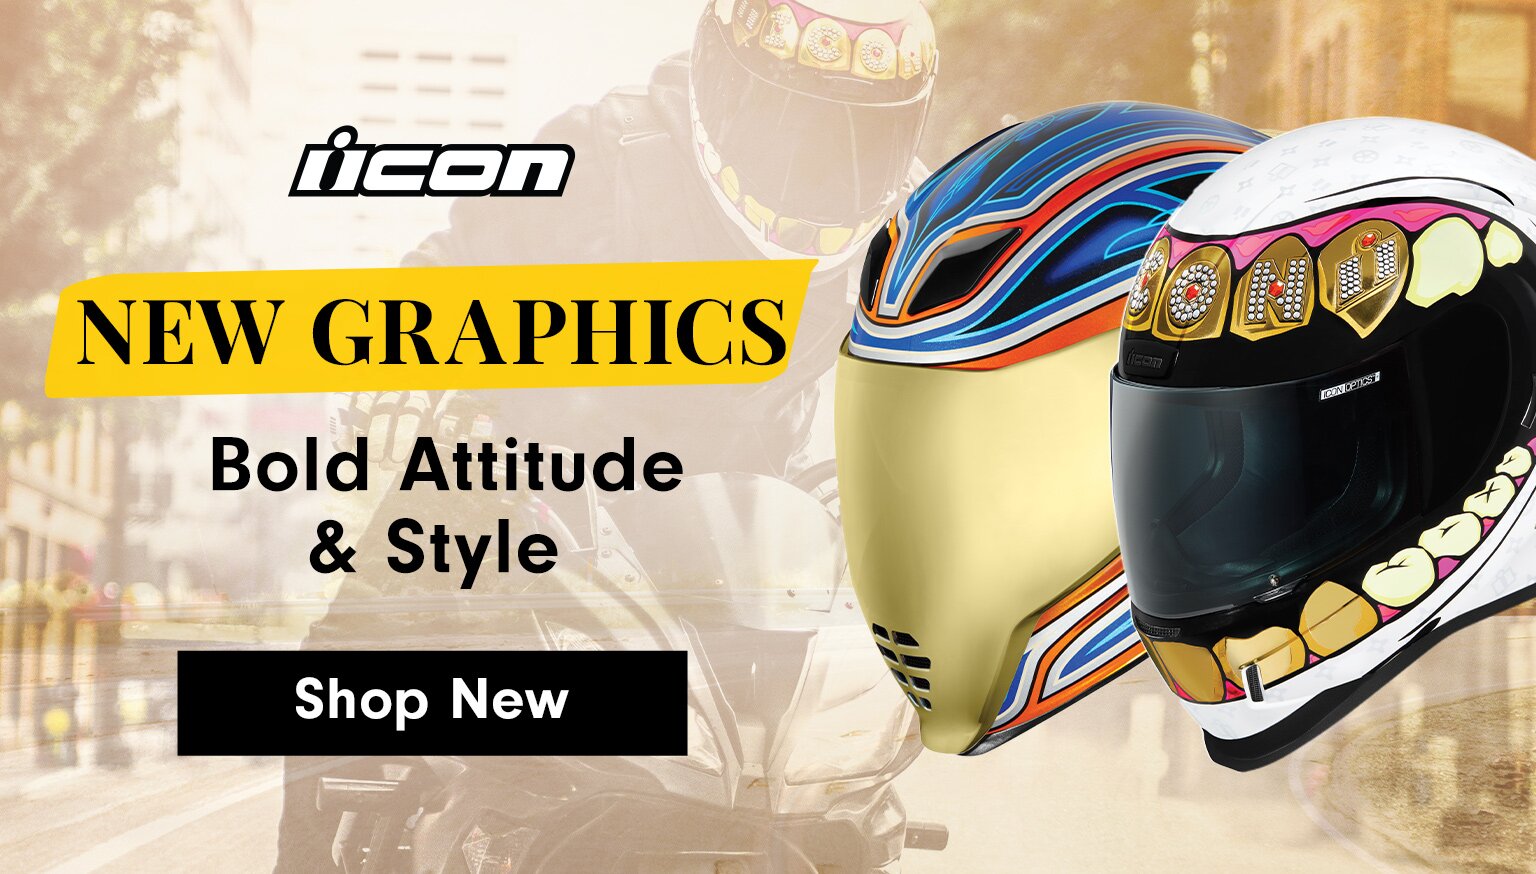 where to purchase motorcycle helmets